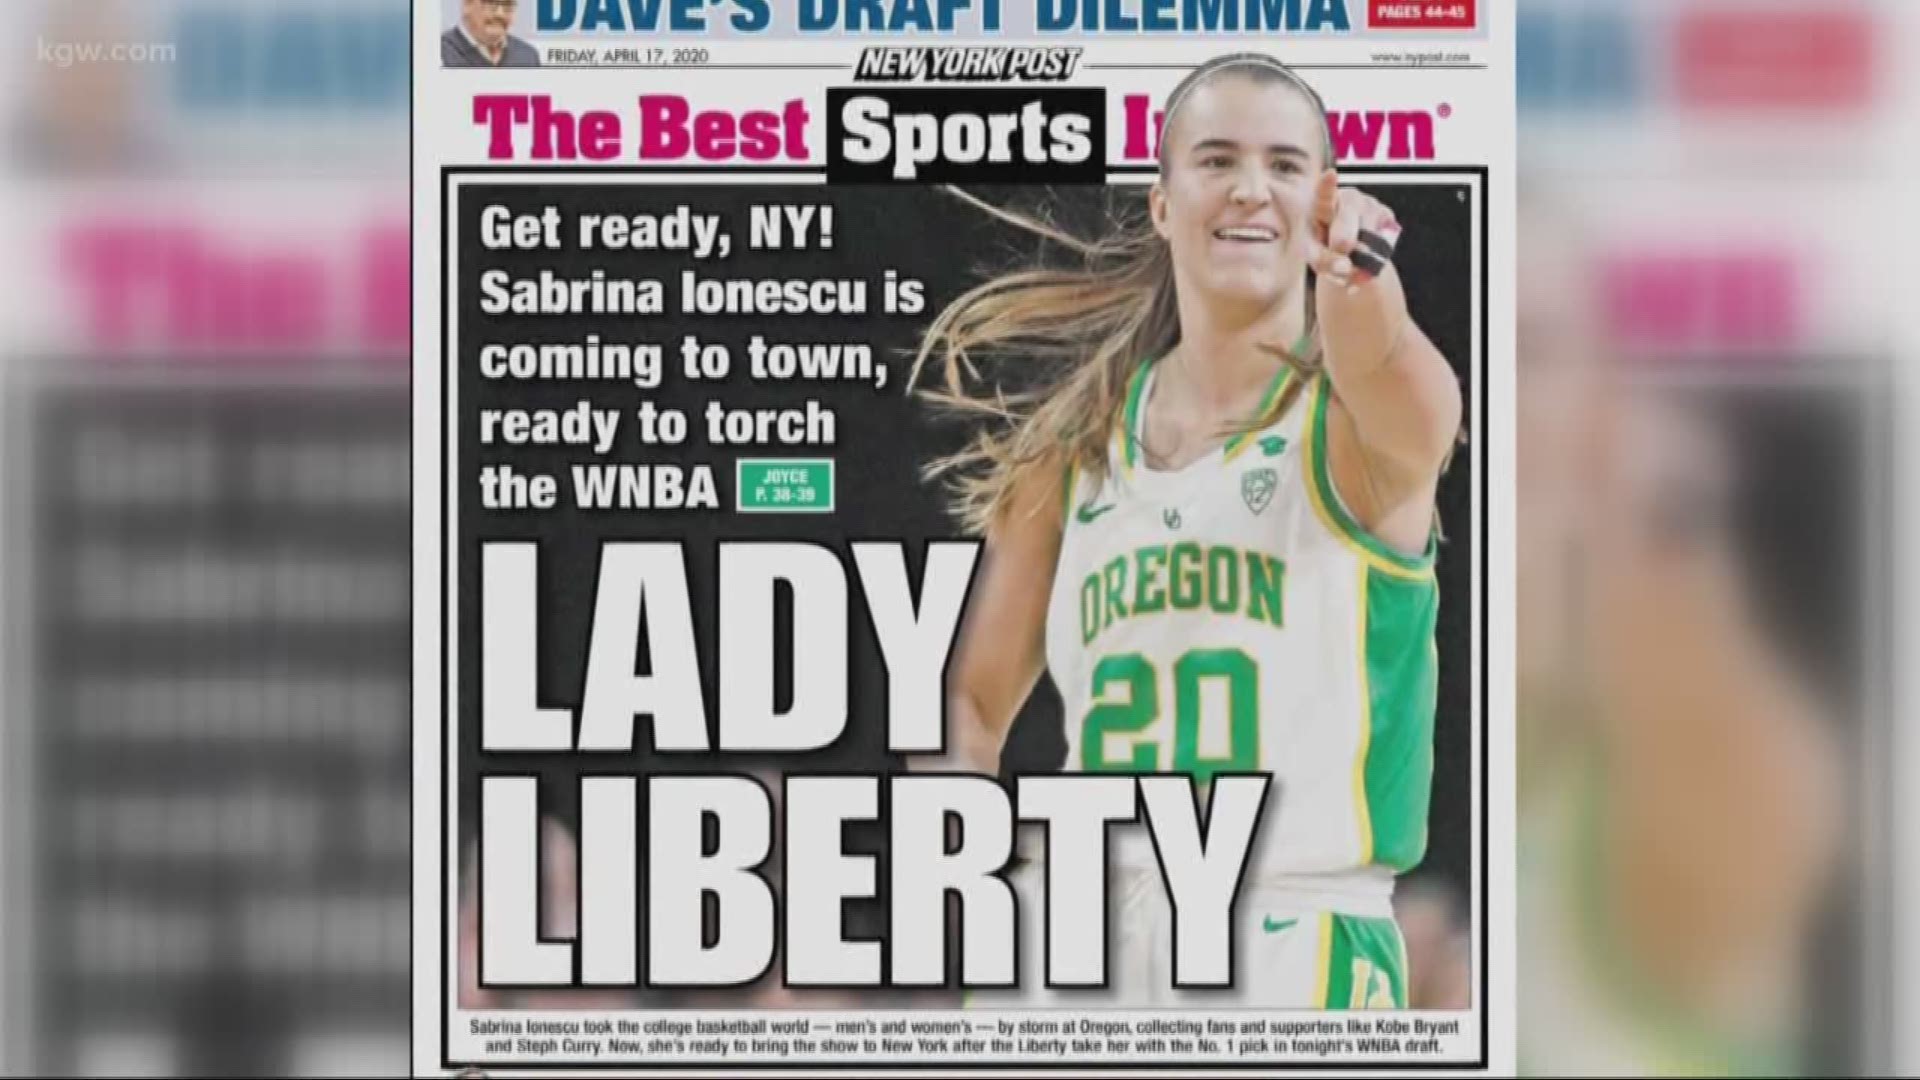 The GOAT is heading to the Big Apple. Sabrina Ionescu was picked No. 1 by the New York Liberty. Her pro jersey sold out in less than an hour.